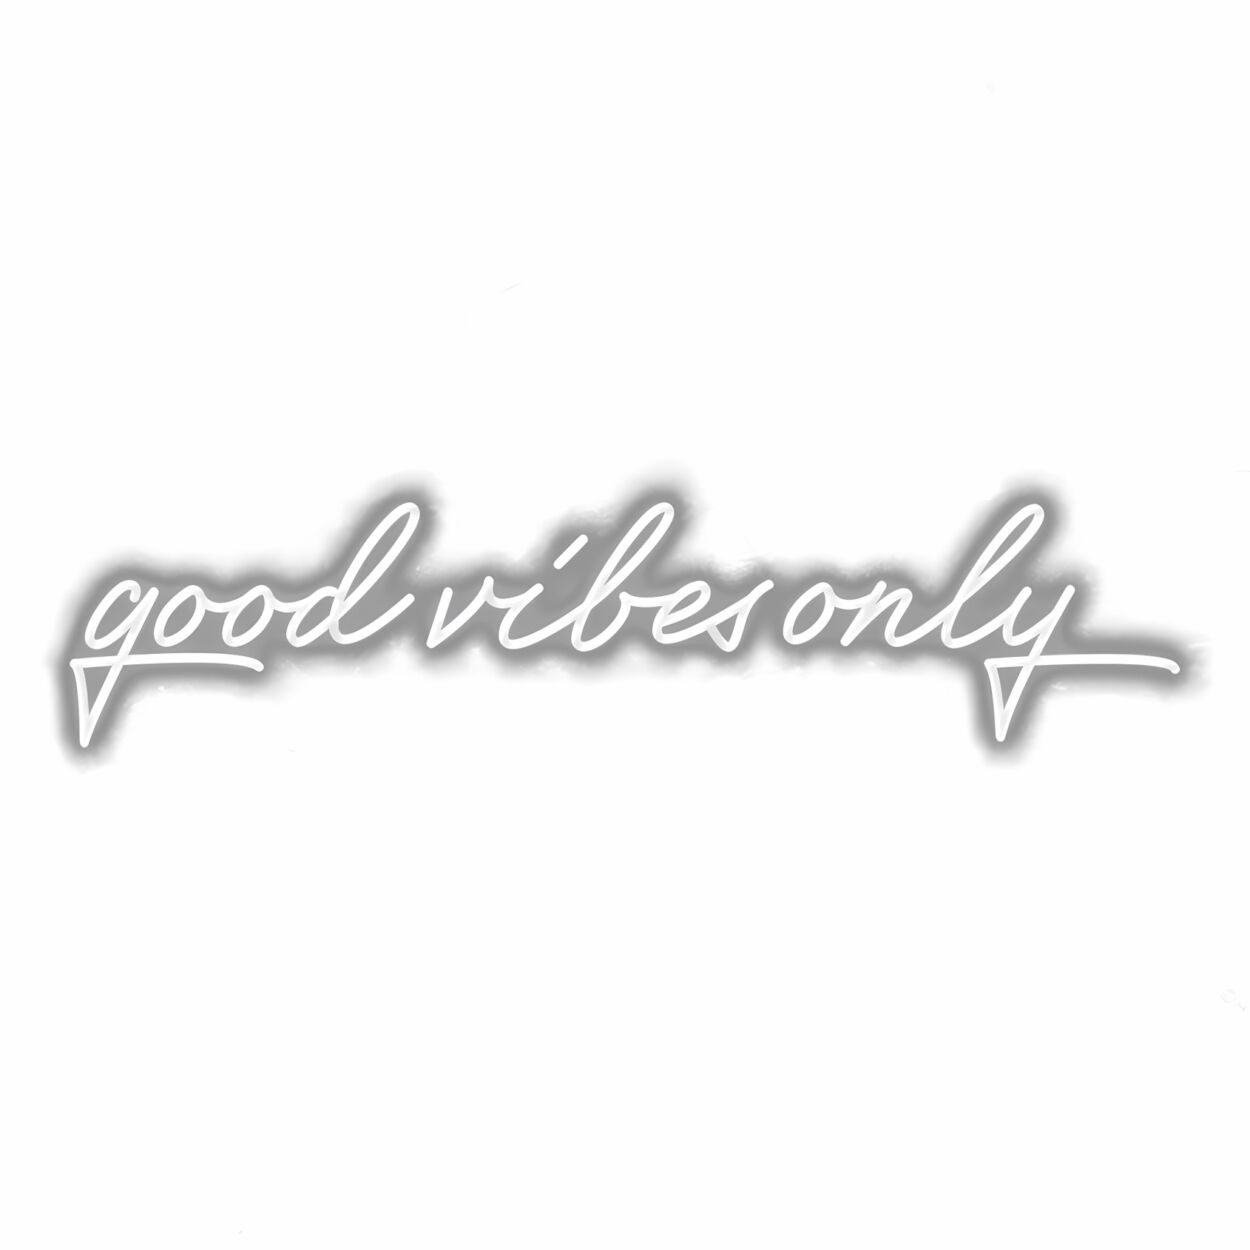 Good vibes only" handwritten inspirational phrase shadow.